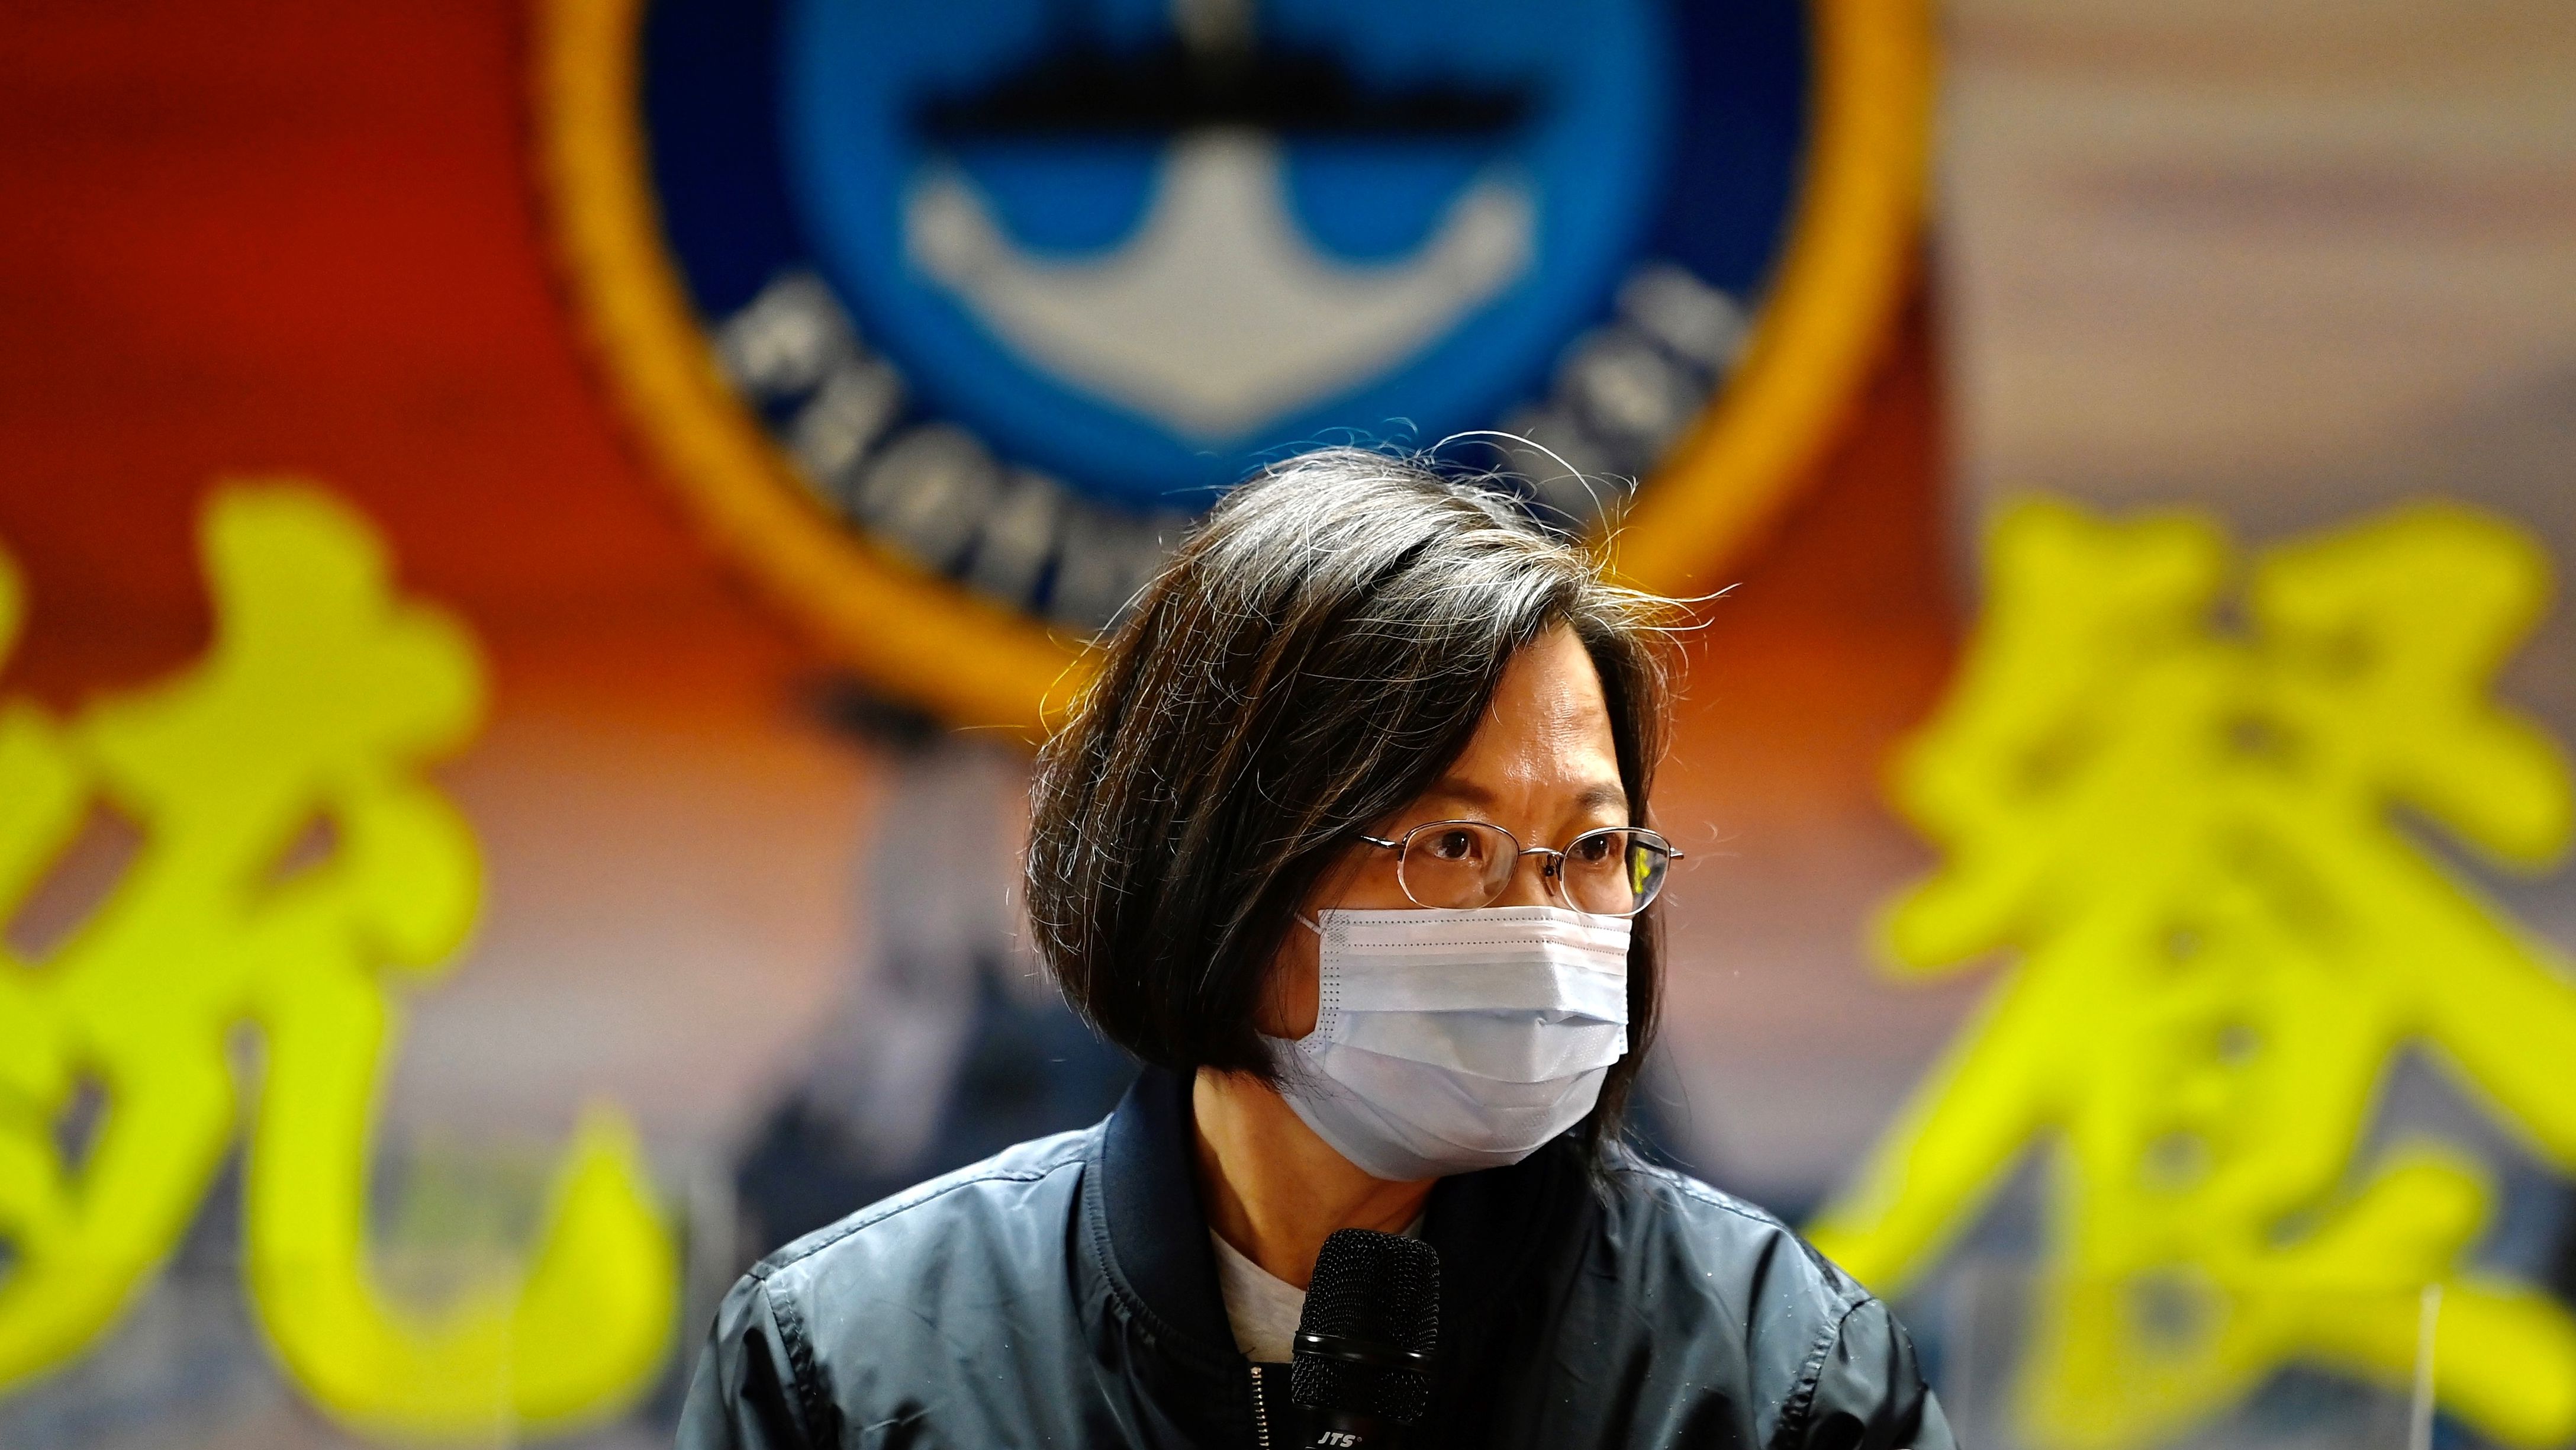 Taiwan President Tsai Ing-wen speaks during her inspection of a Republic of China Navy fleet in Keelung on March 8, 2021.